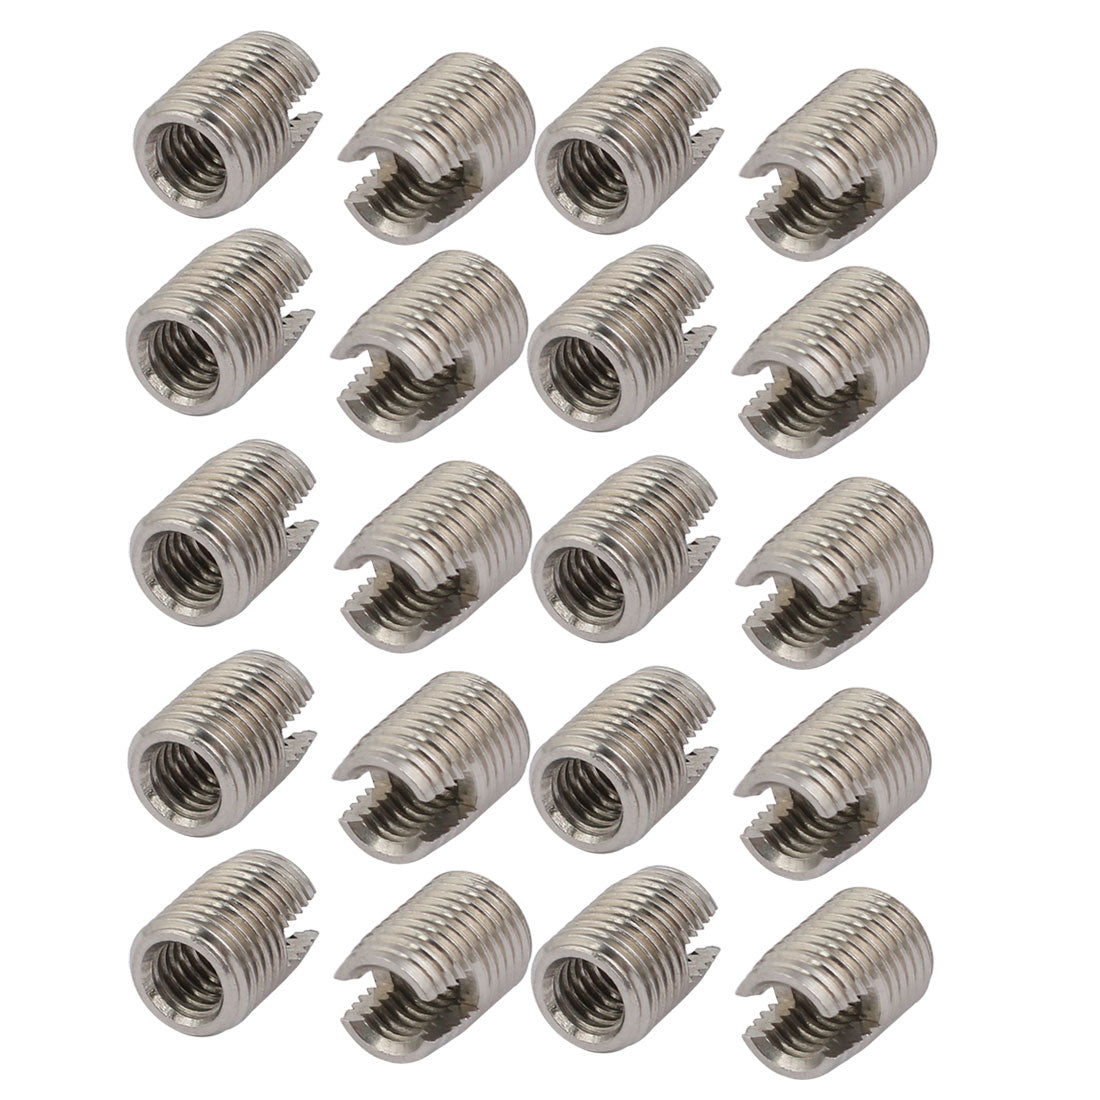 uxcell Uxcell M6x12mm 304 Stainless Steel Self Tapping Slotted Thread Insert 20pcs